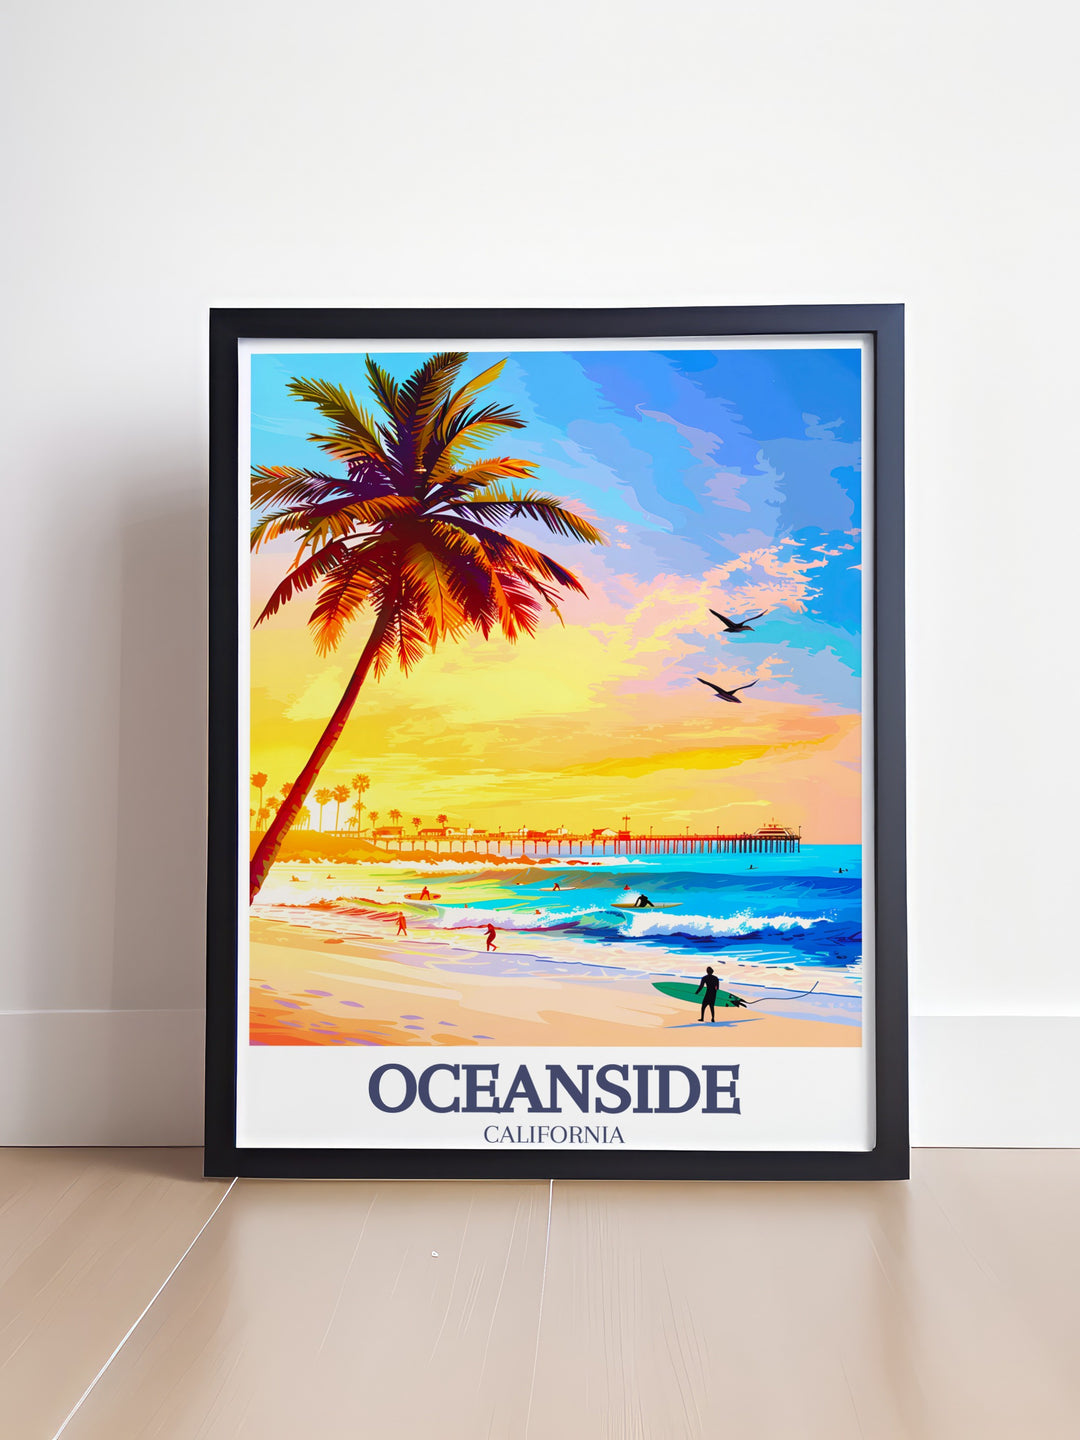 Stunning poster of Oceanside Beach and Oceanside Pier capturing the serene ambiance of the beach ideal for adding a touch of coastal charm to your living room bedroom or office decor